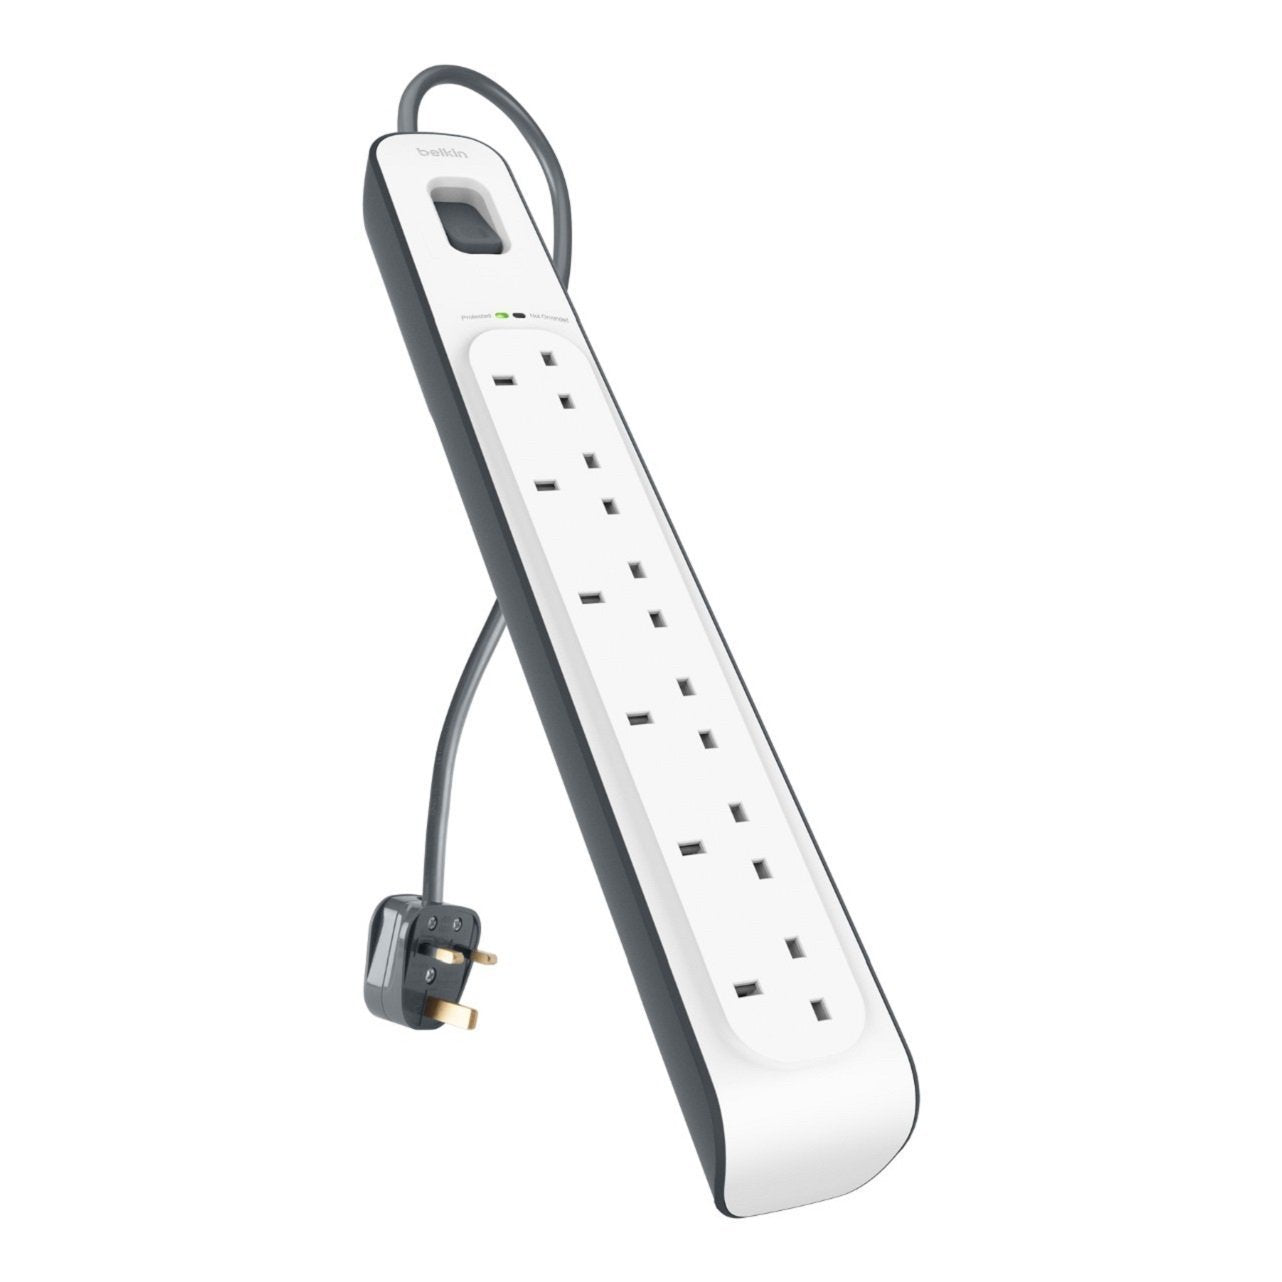 Belkin Surge Master Protector 6 Way outlet 2m - Store 974 | ستور ٩٧٤